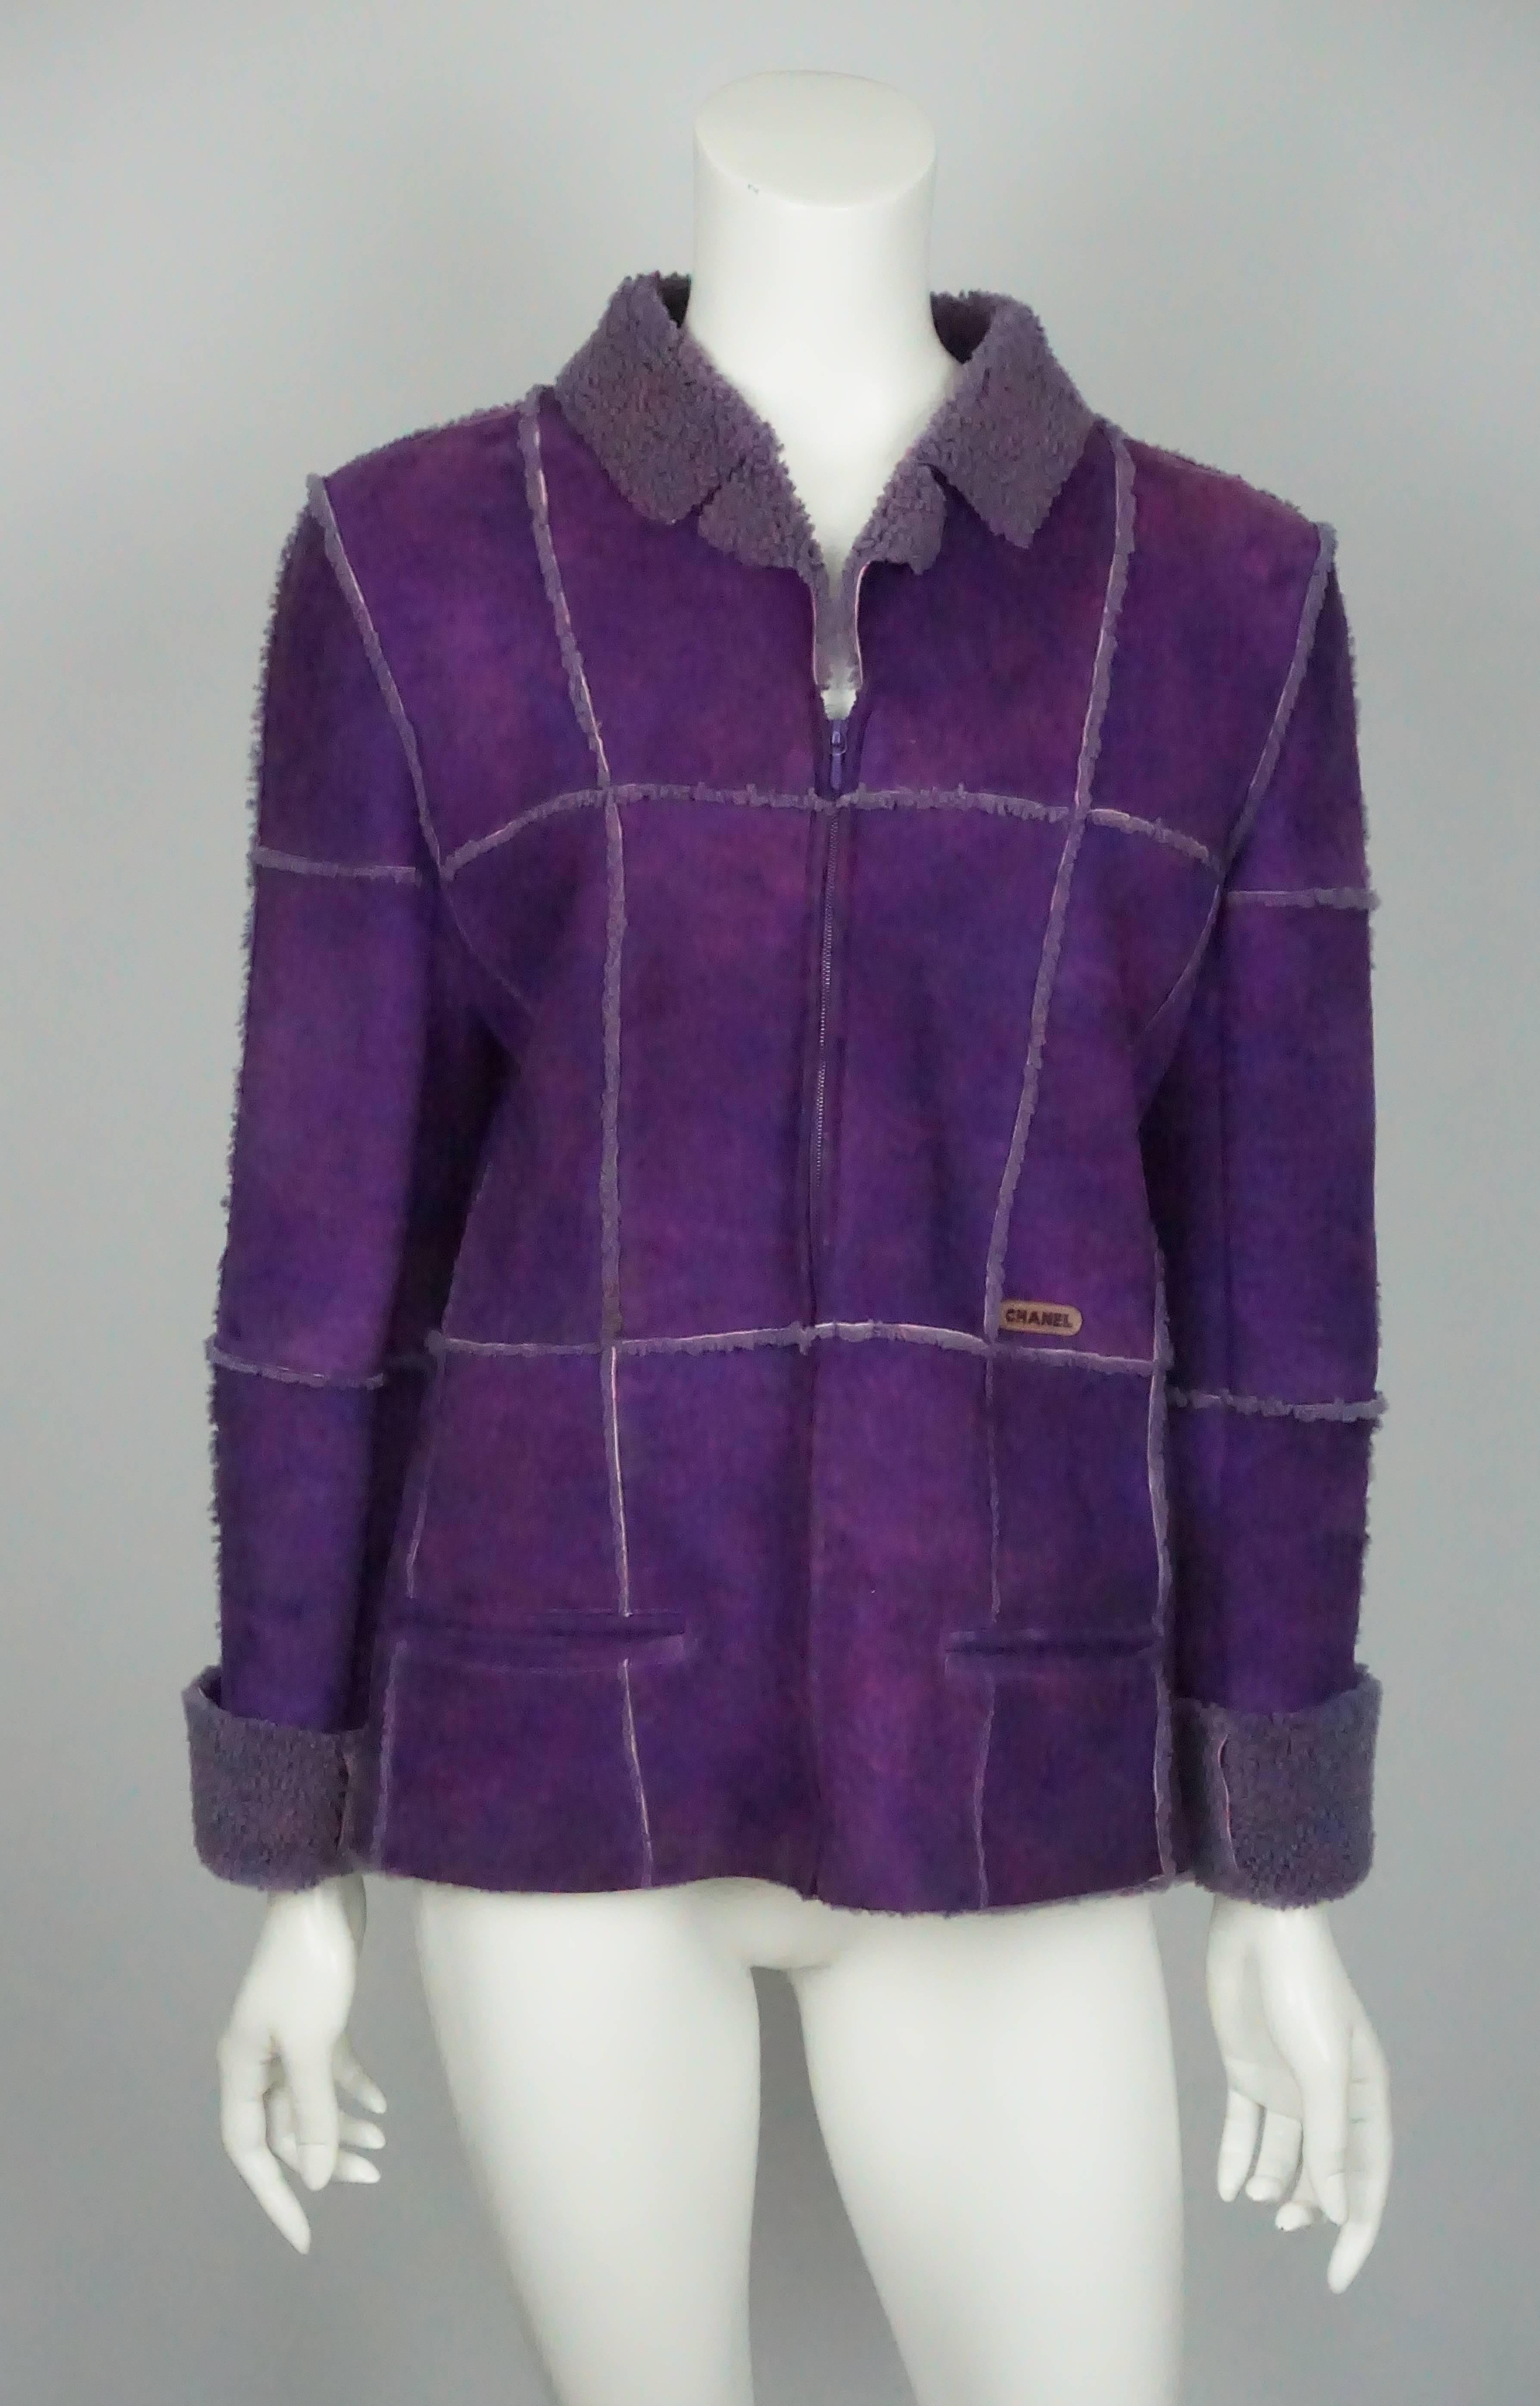 Chanel Purple Sherling Coat - 40 - 00A  This very special sherling jacket has a front zip, two front pockets, a 3